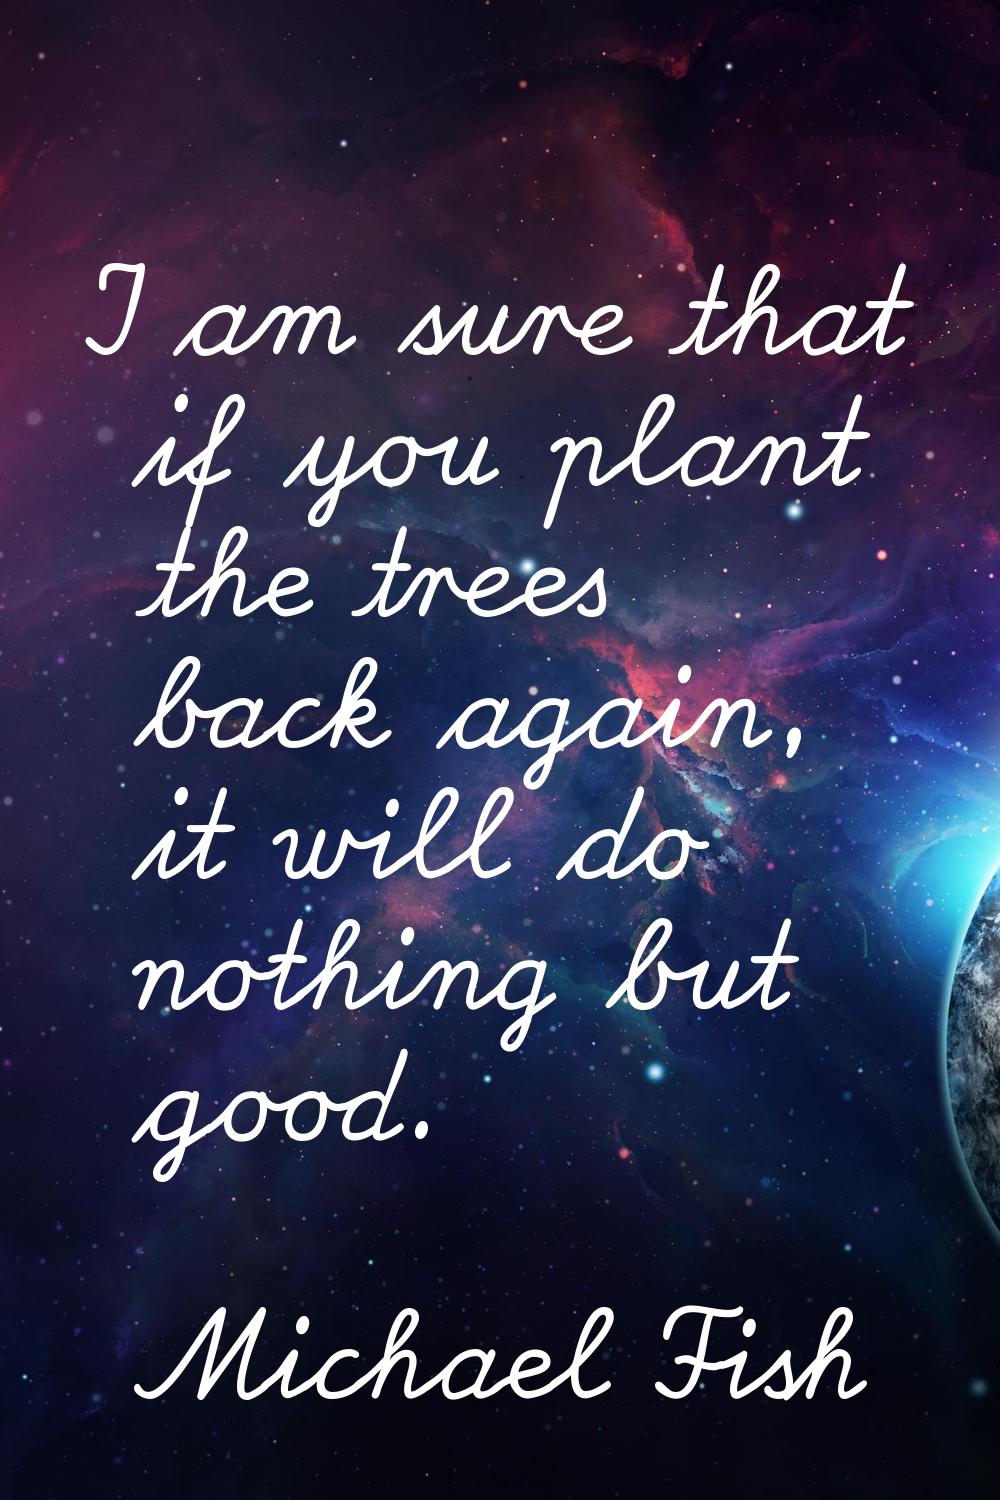 I am sure that if you plant the trees back again, it will do nothing but good.